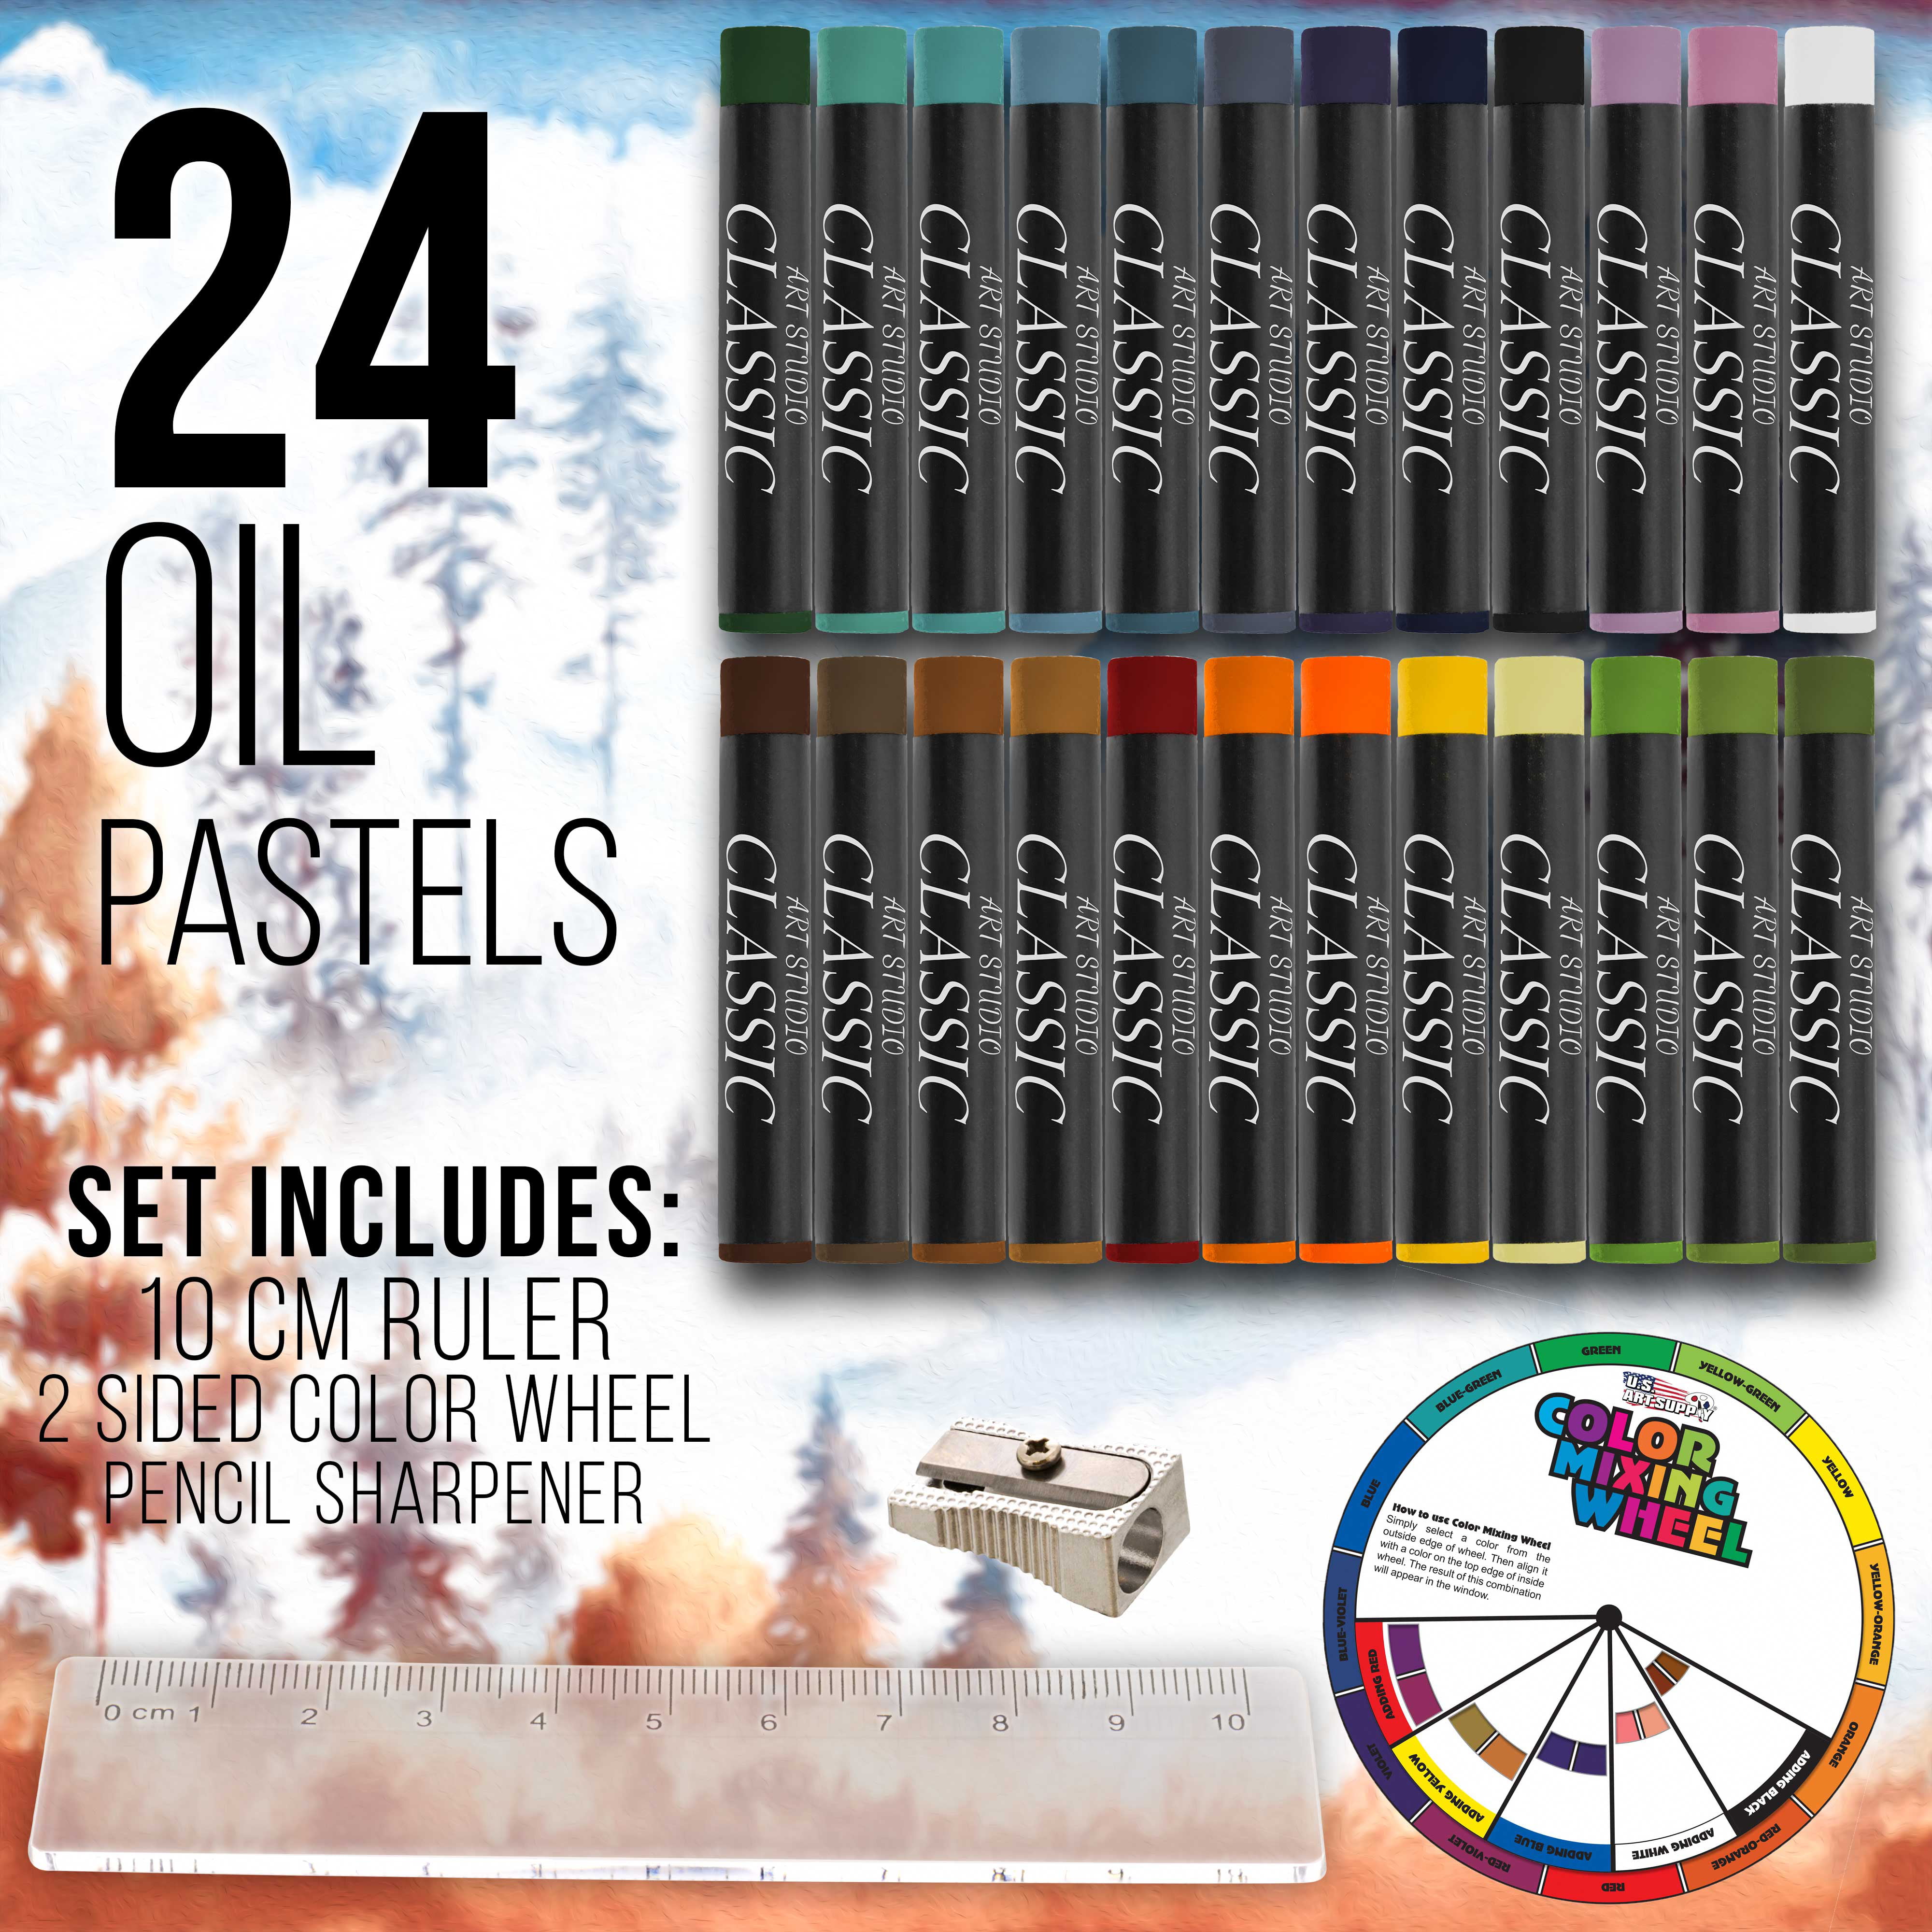 143 Piece Deluxe Art Set, Paint Set in Portable Wooden Case，Professional  Art Kit，Art Supplies for Adults，Teens and Artist， Painting, Drawing & Art